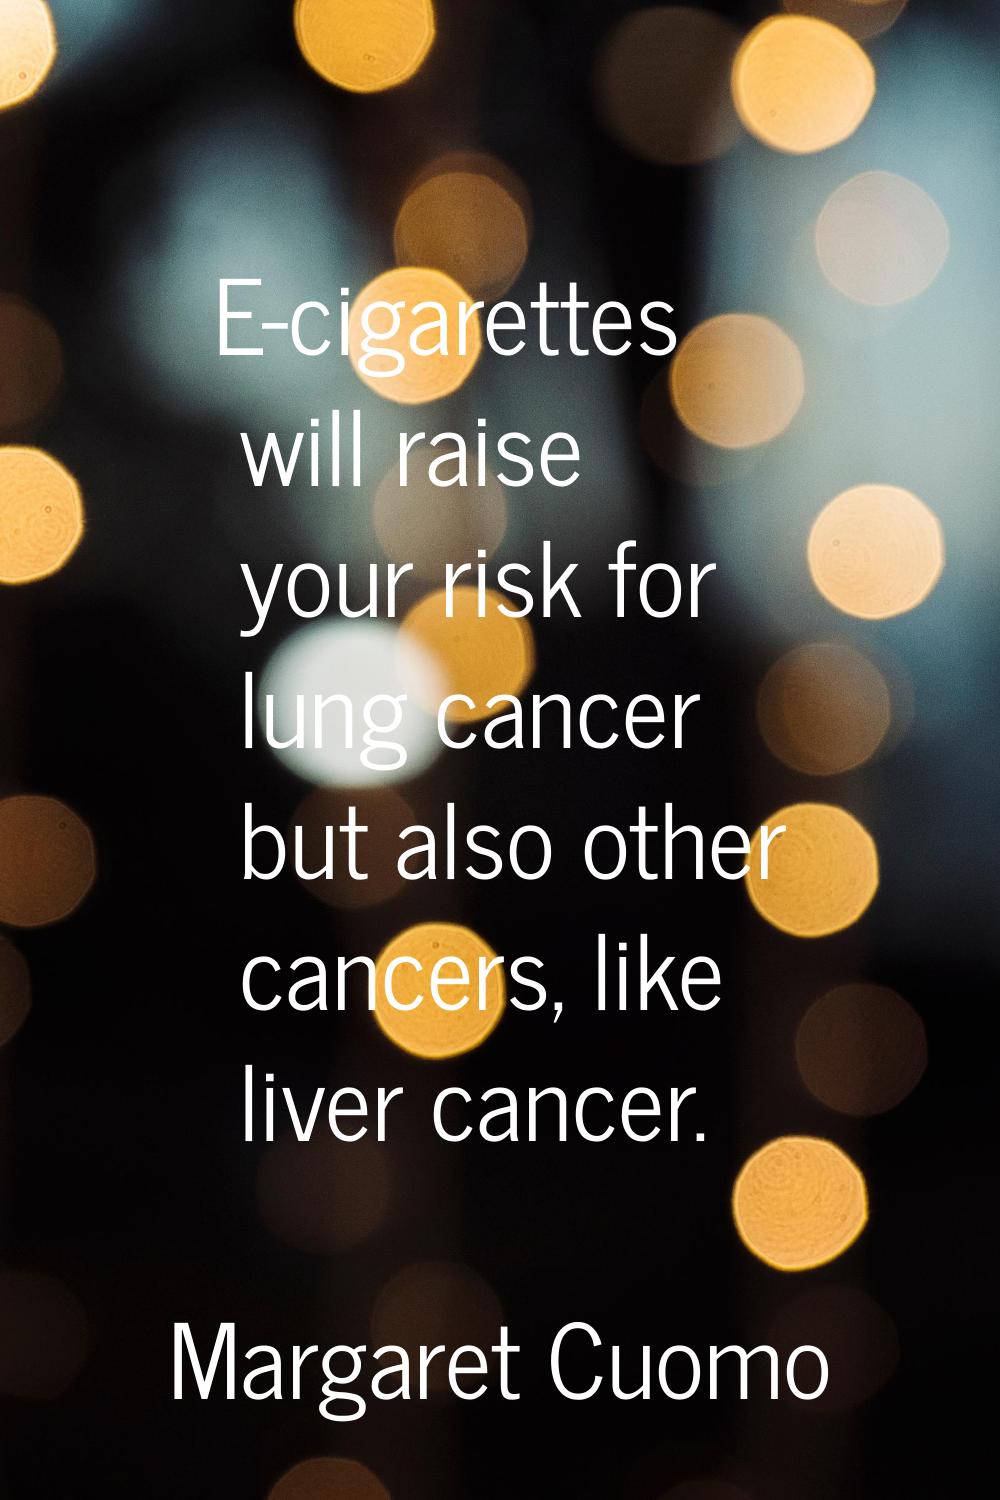 E-cigarettes will raise your risk for lung cancer but also other cancers, like liver cancer.